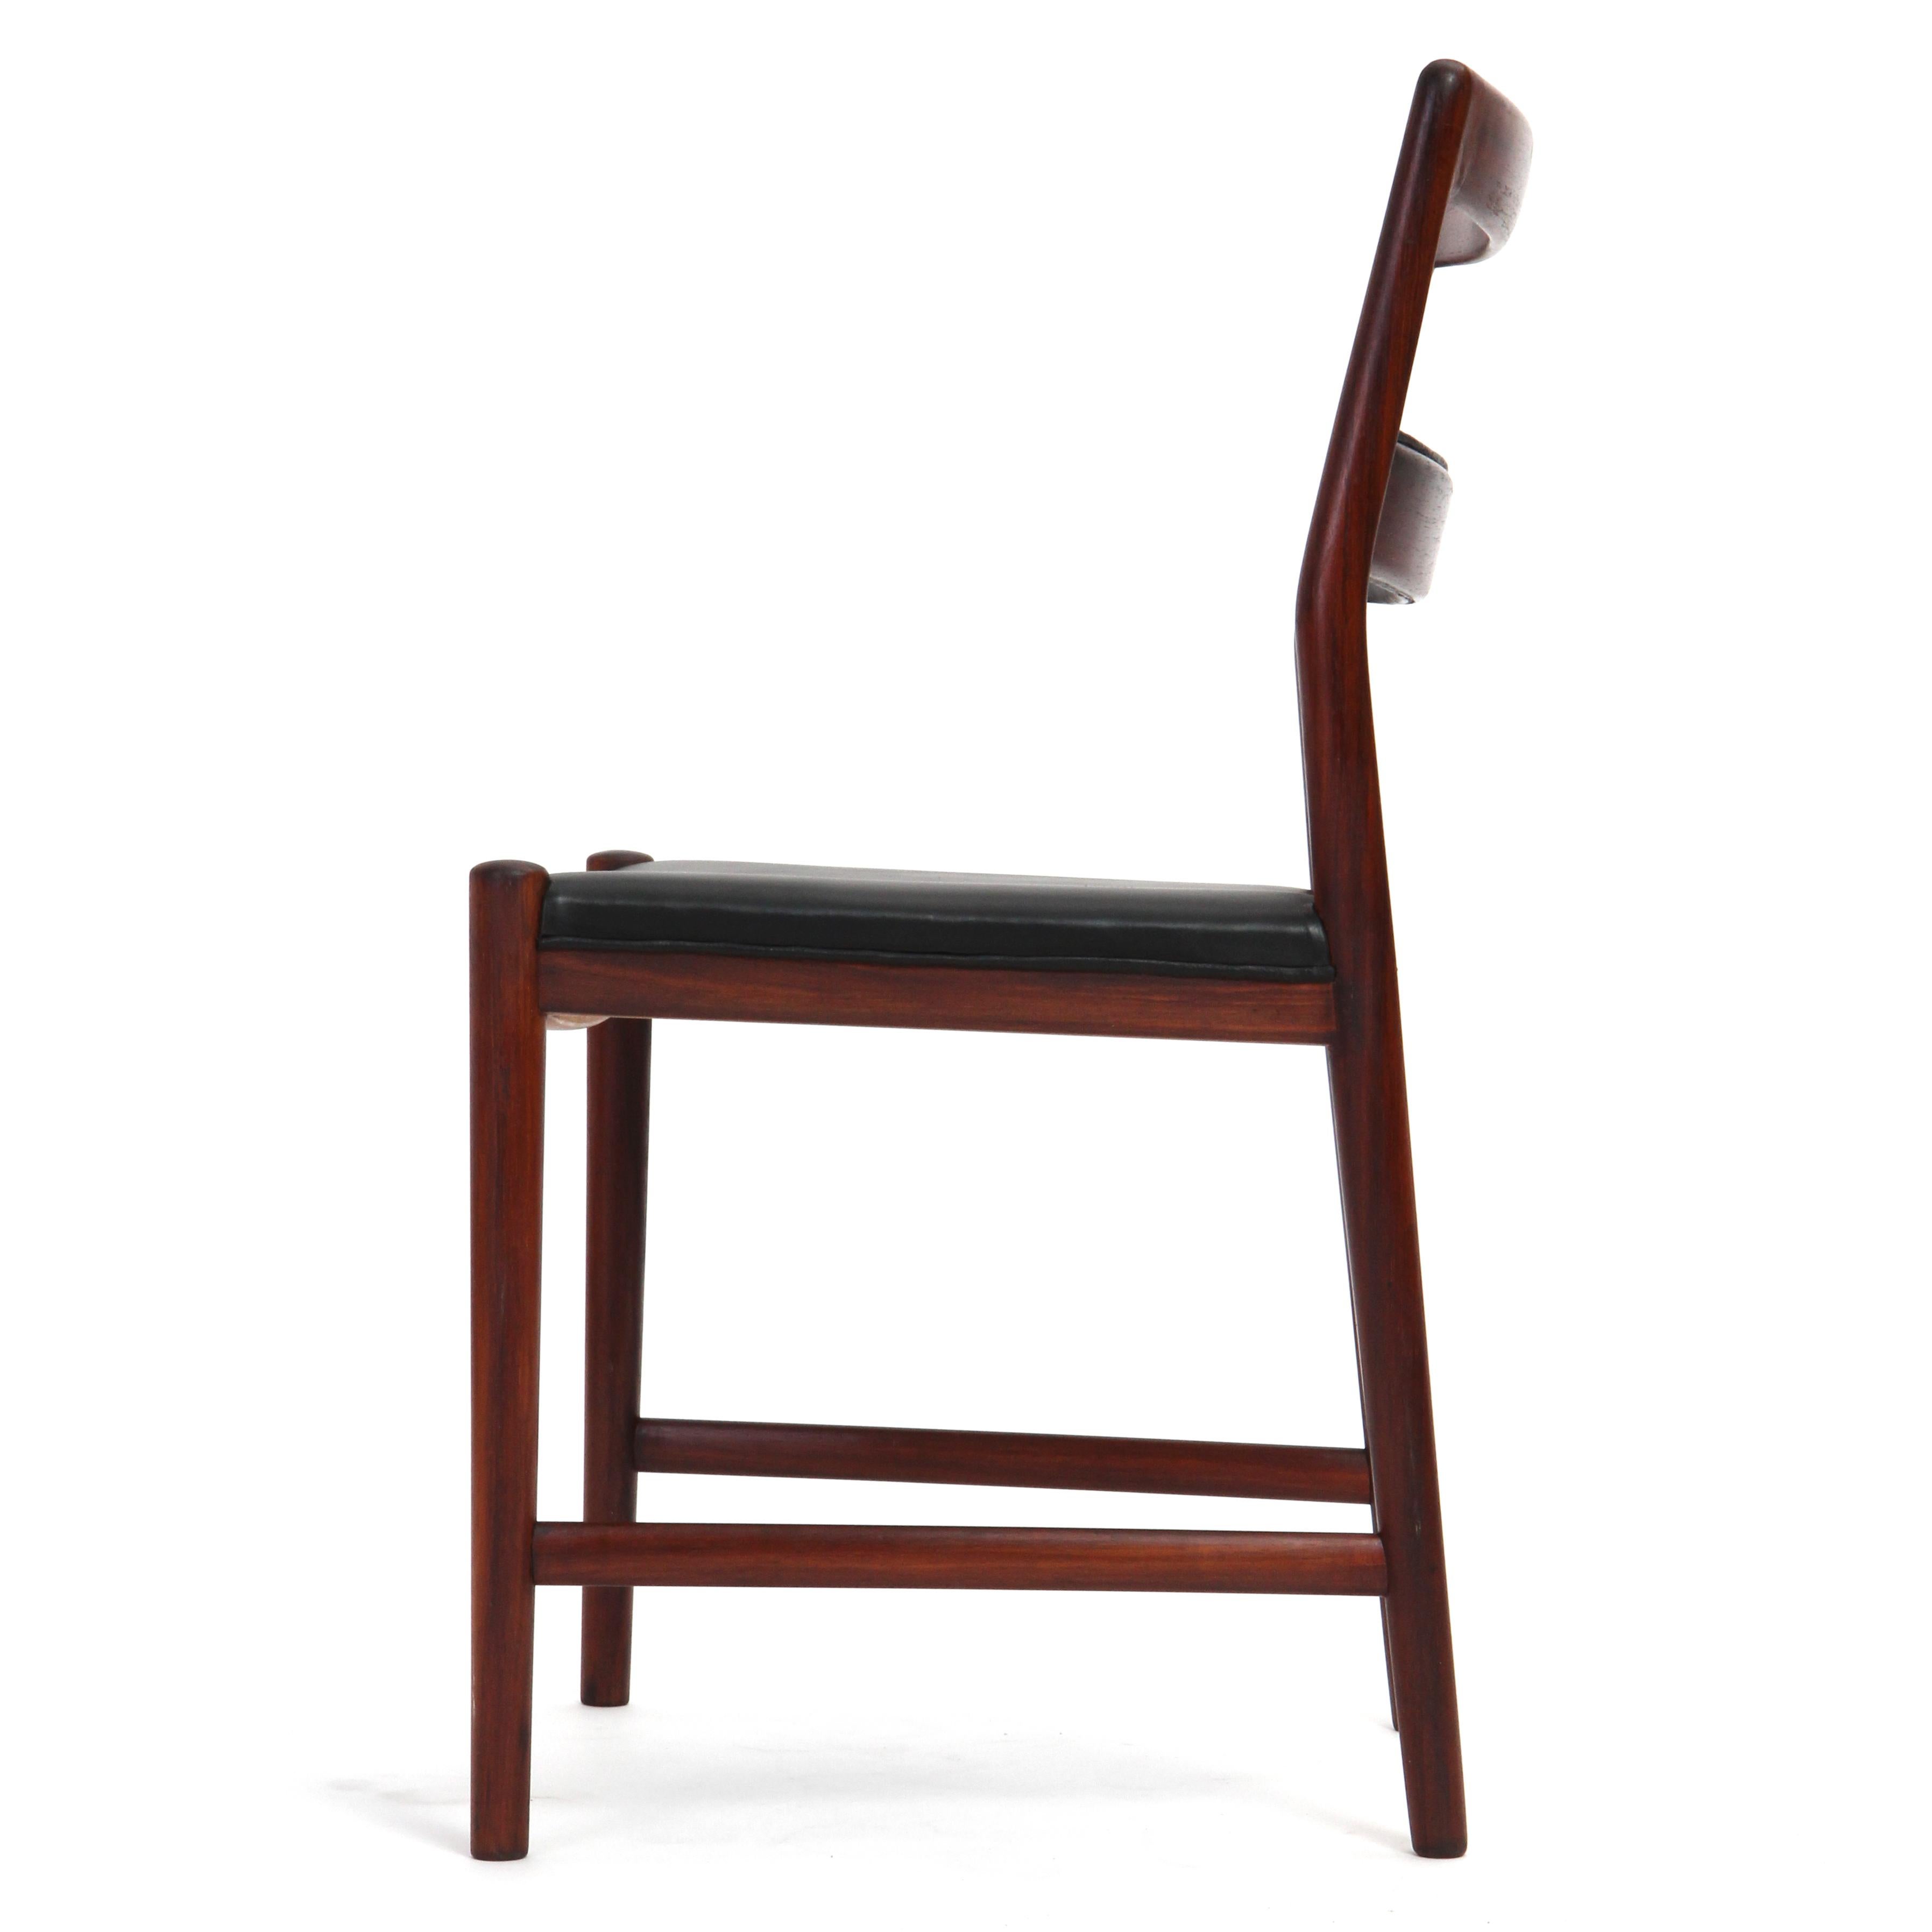 A Scandinavian Modern ladder back dining chair by renowned Danish designer Helge Vestergaard-Jensen. This sculptural chair features a luminous Brazilian rosewood frame with black leather seat and leather-wrapped center slats. Crafted in Denmark by